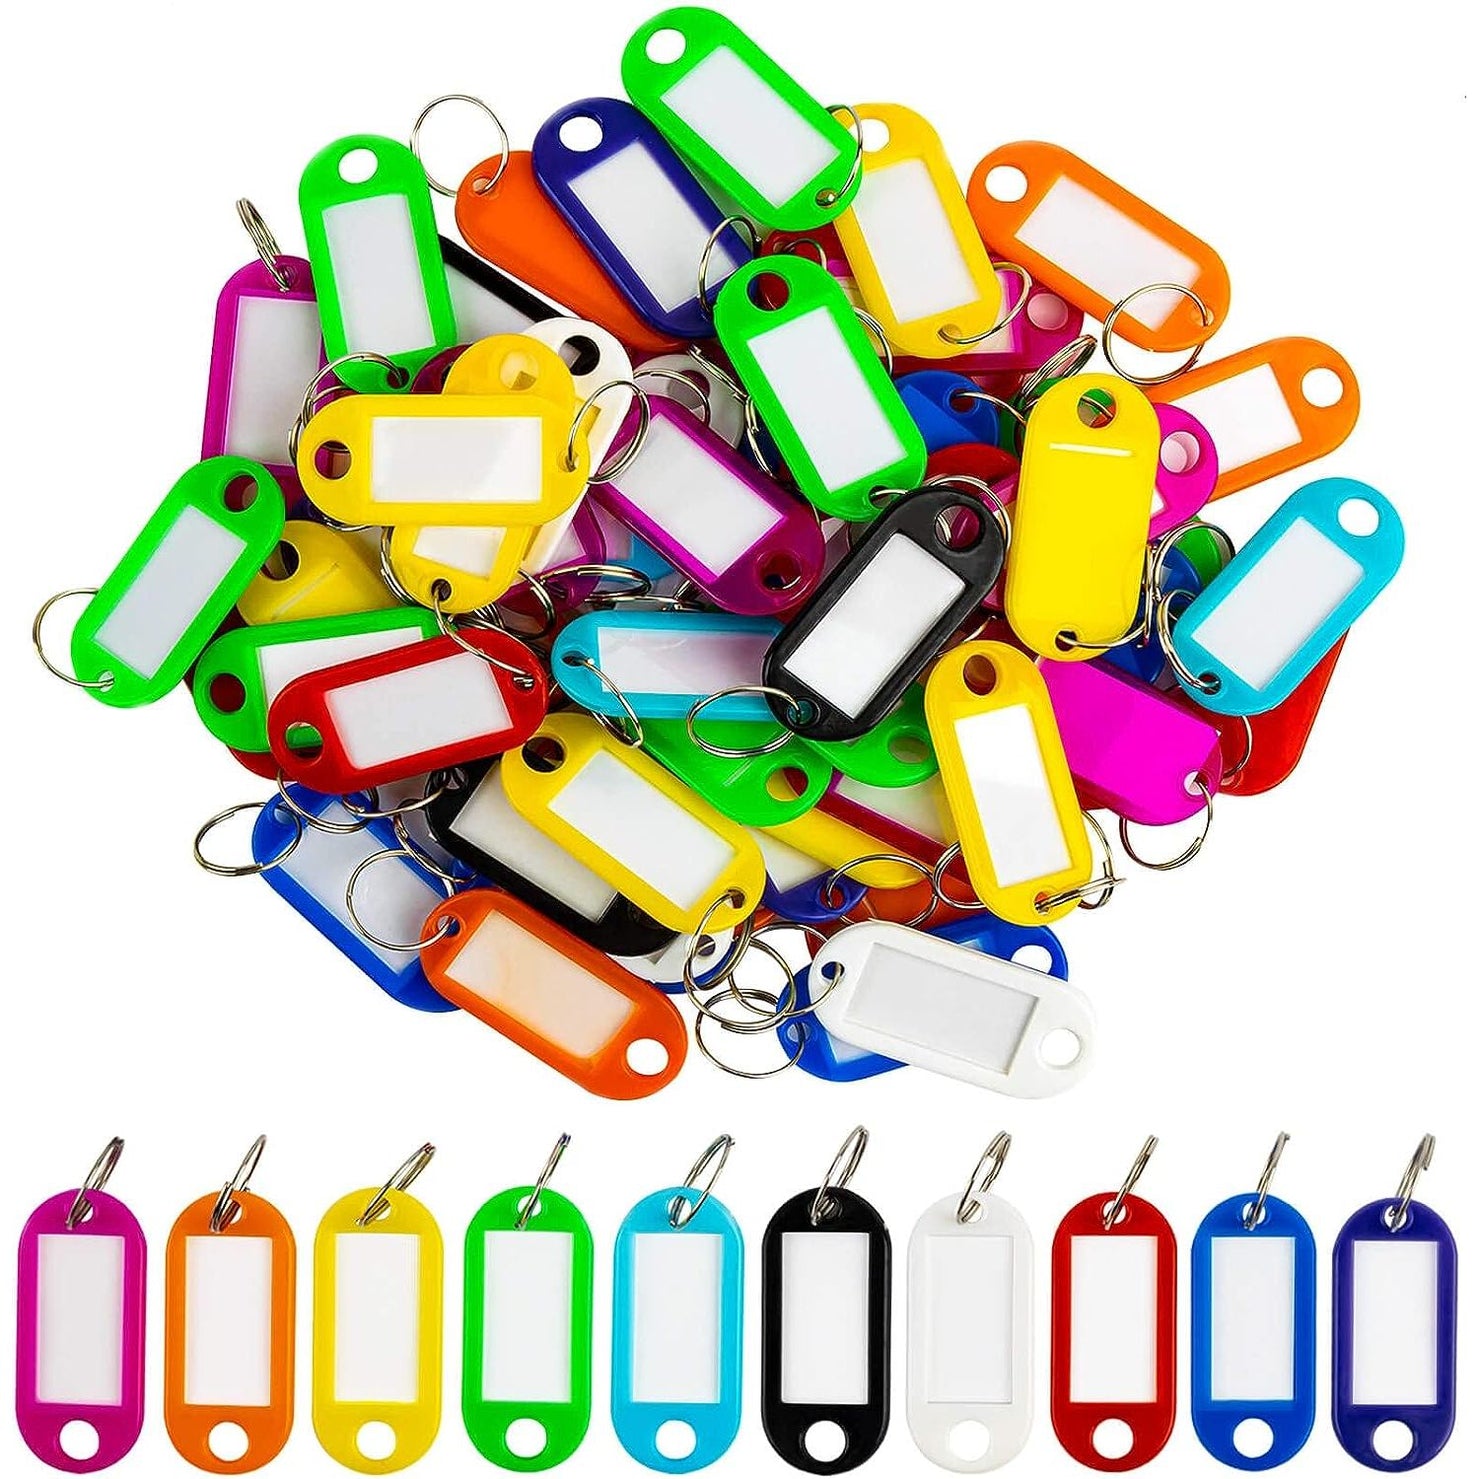 Key Tags Plastic 10 Assorted Colors